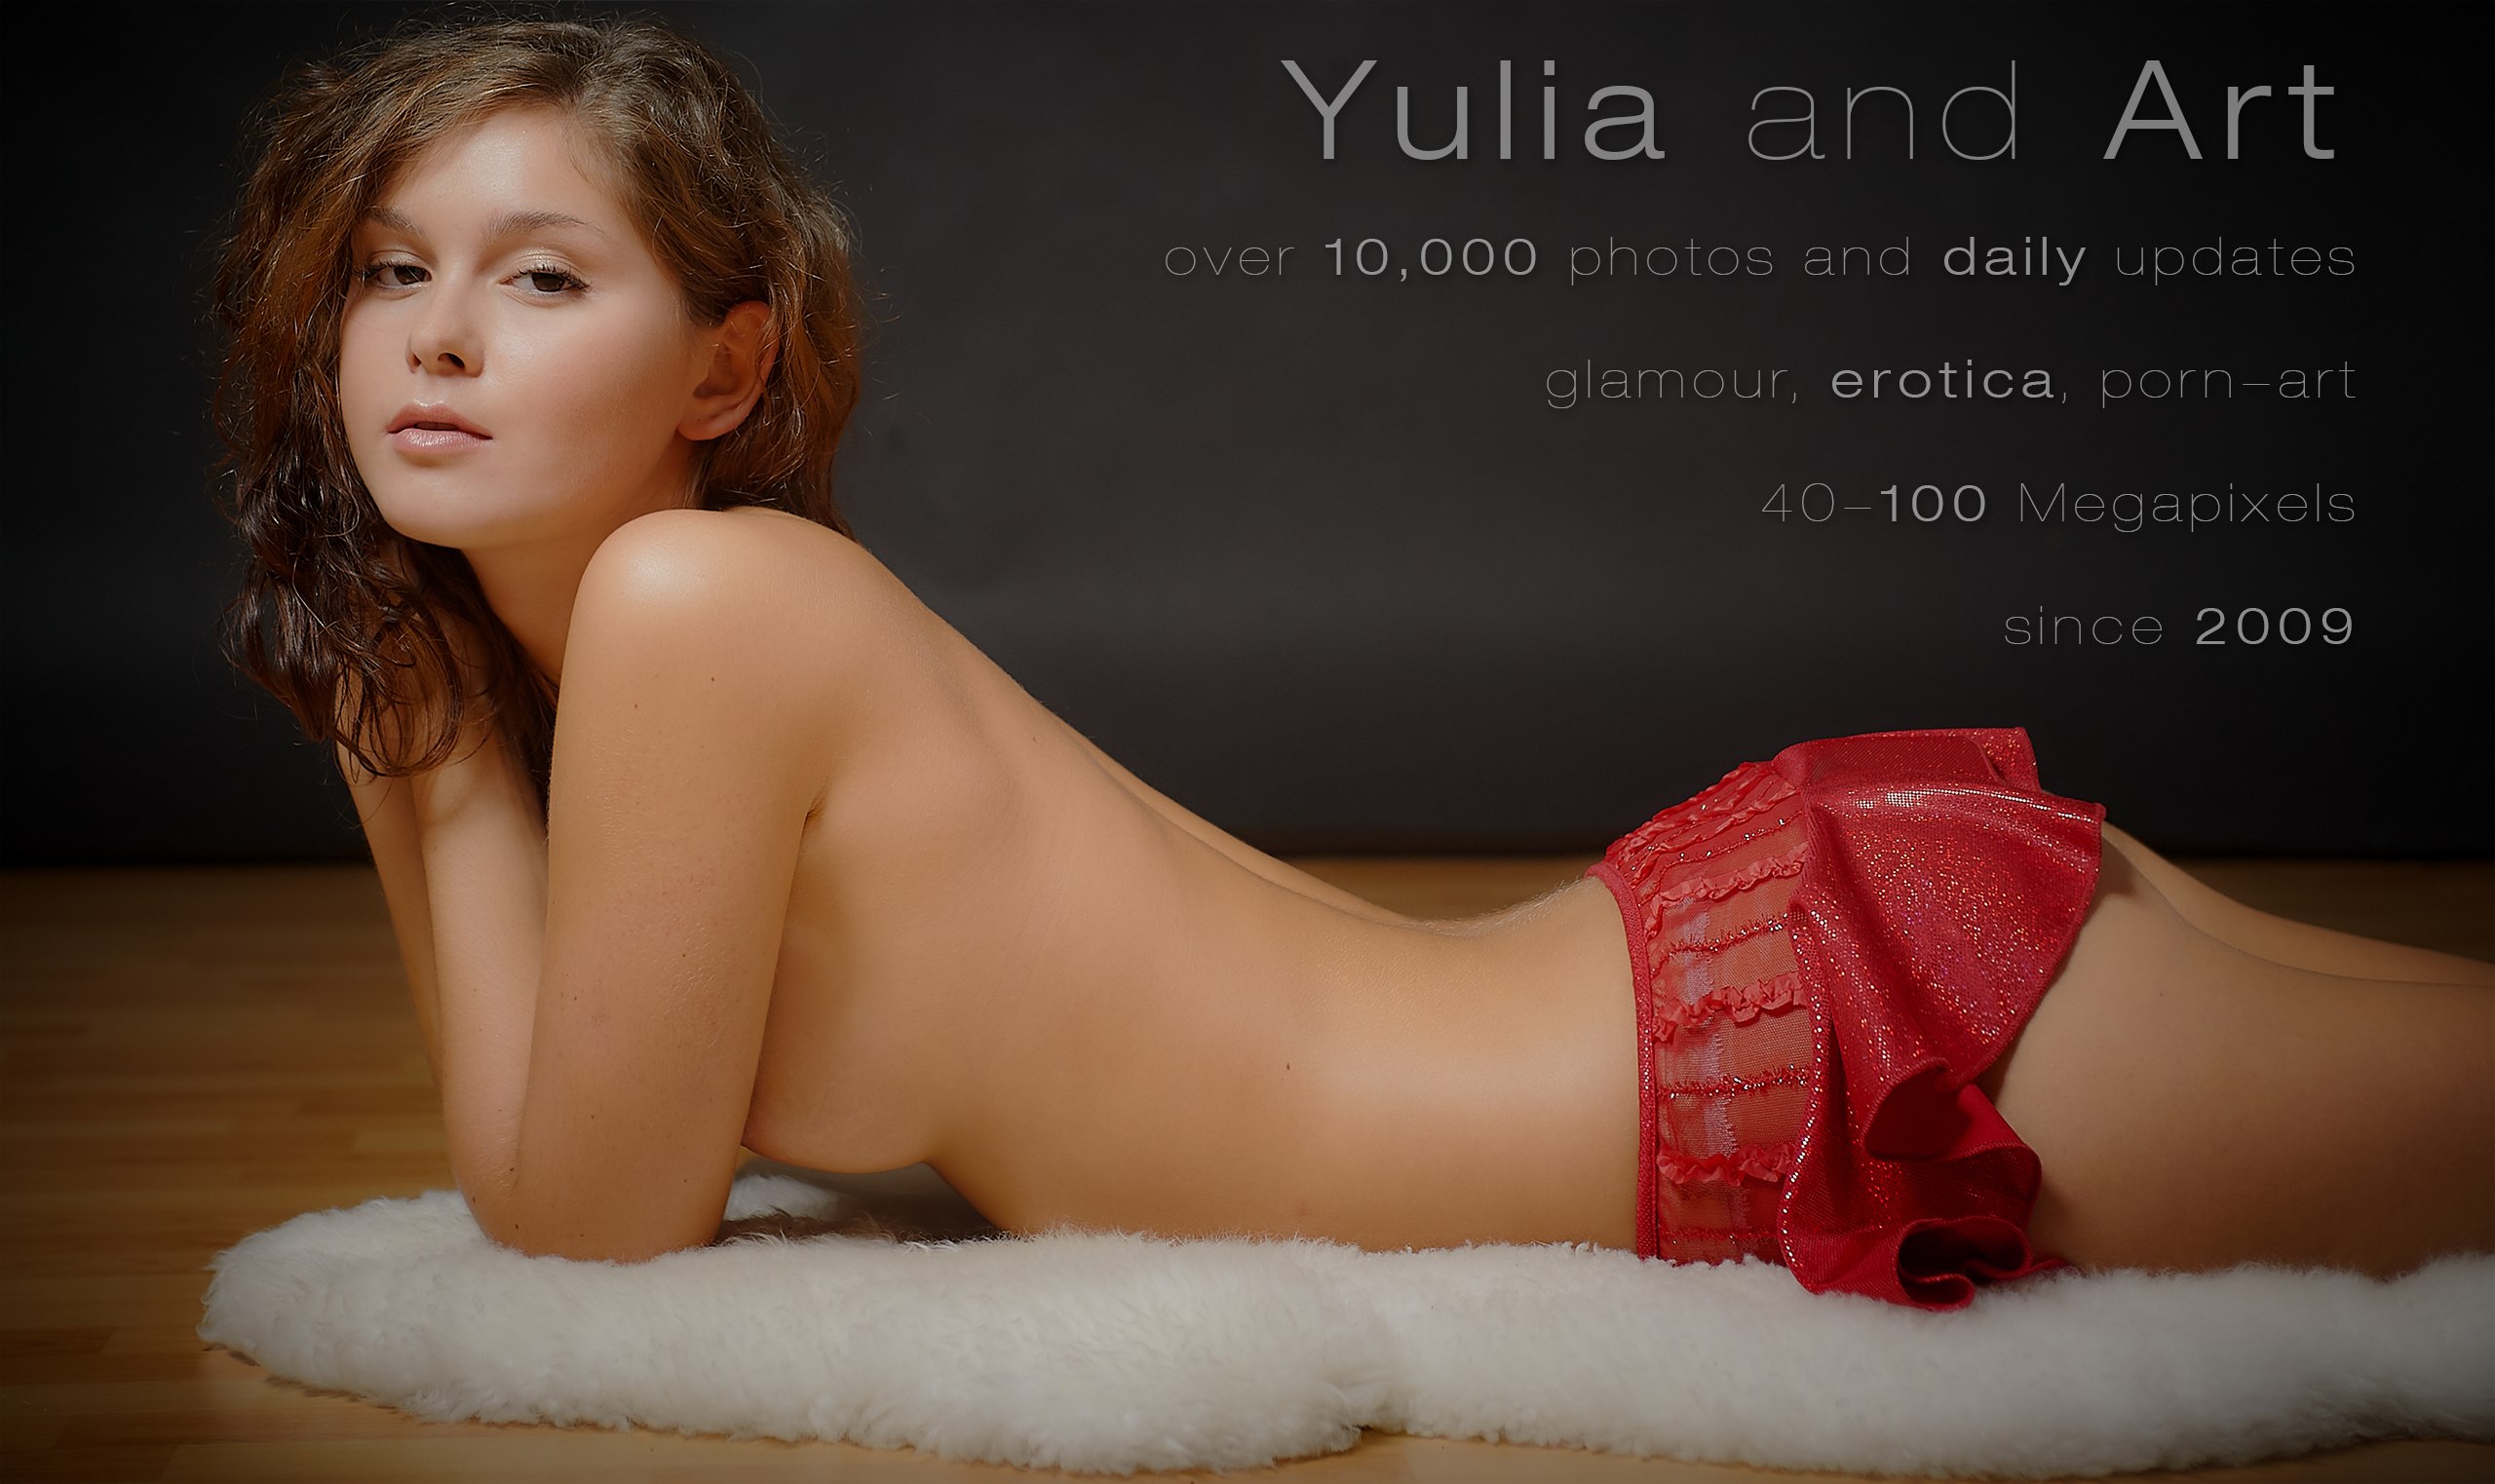 Erotic Model Gallery - Yulia's Art Gallery - Finest nude and erotic art since 2009